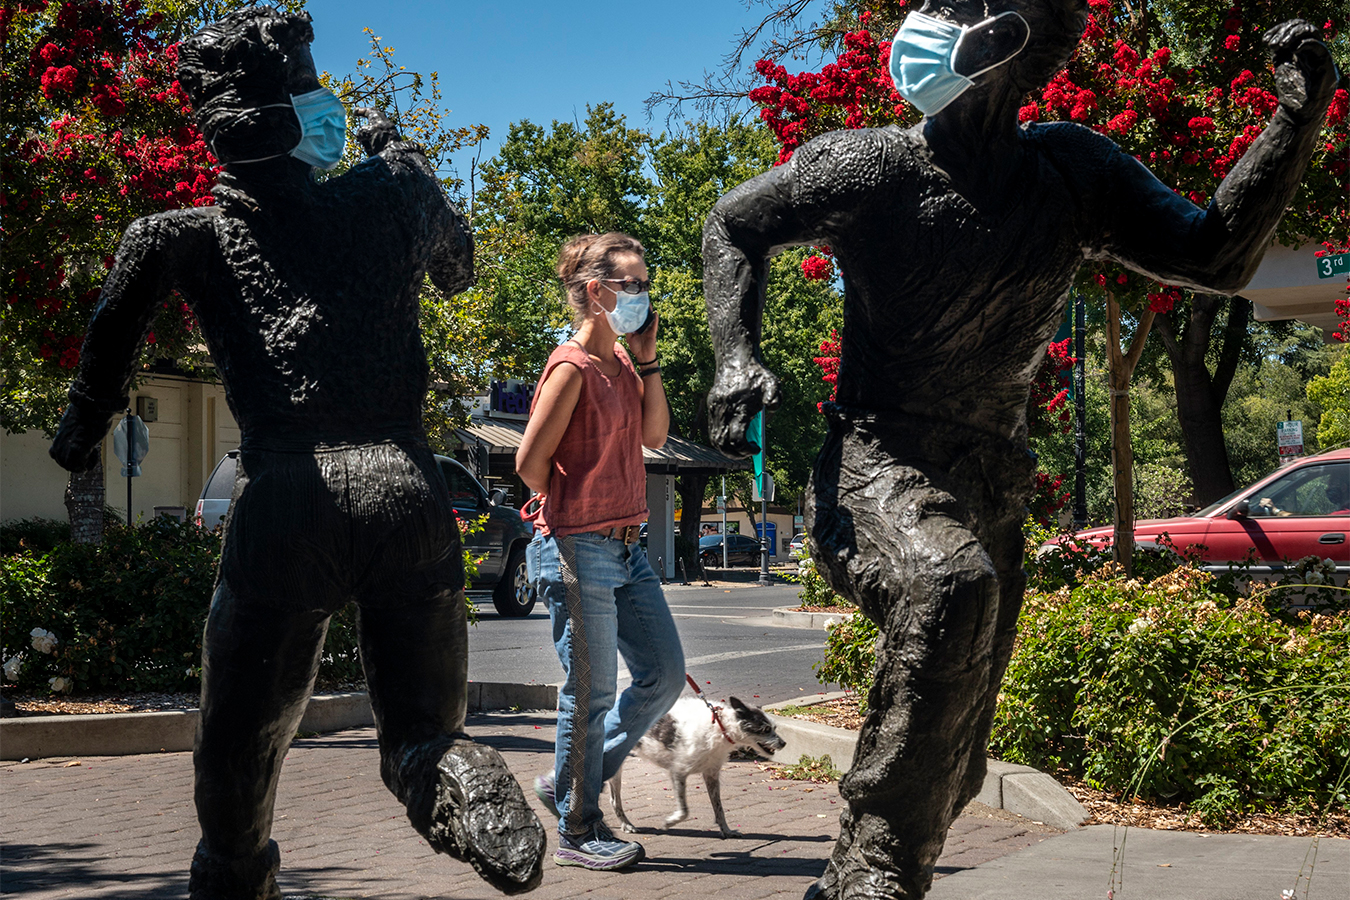 A woman is seen walking her dog on the sidewalk on a sunny day. She is framed on her left and right by two black statues of running children. Surgical masks are affixed across their faces.